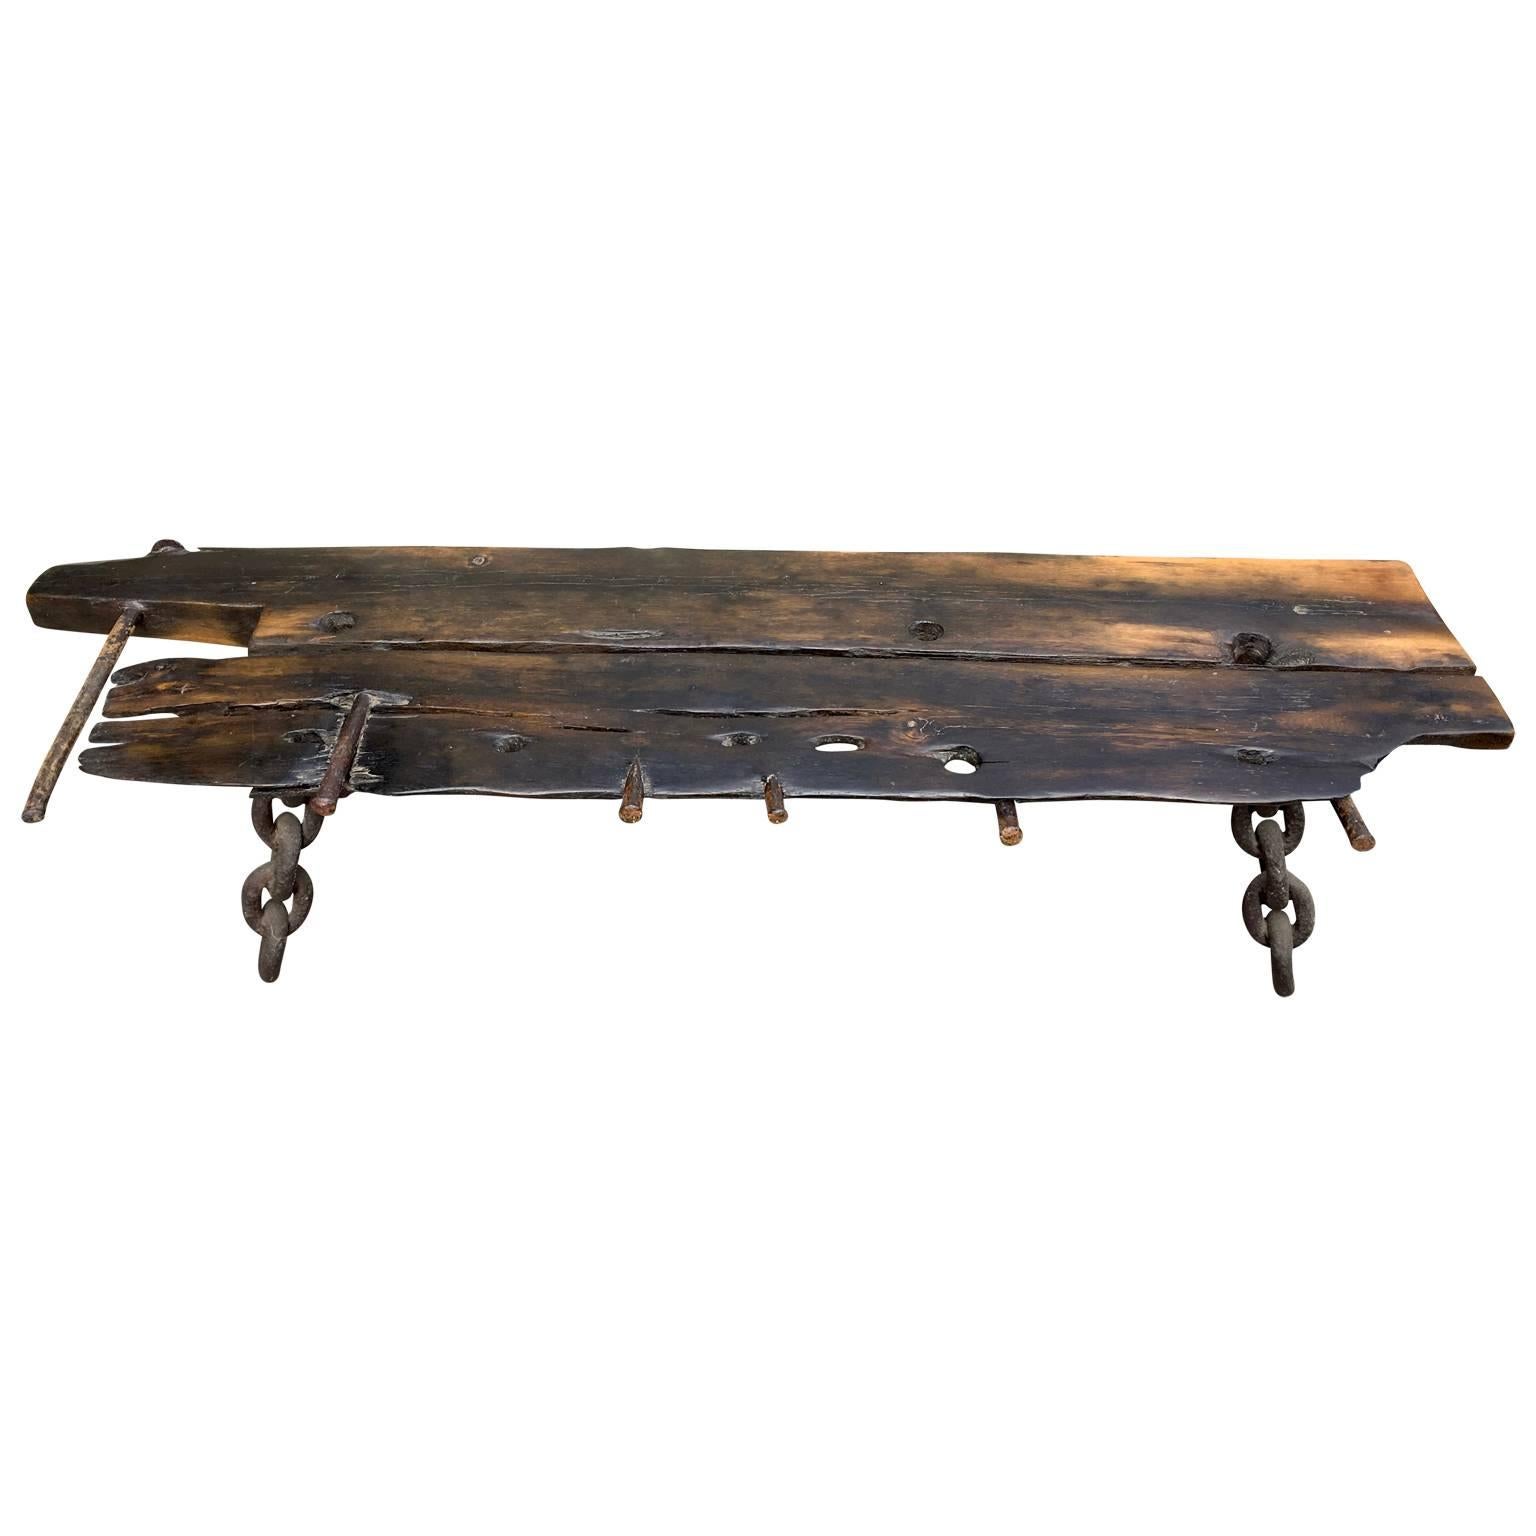 M. Stalker Long Studio Bench from Shipwreck Wood and Chain For Sale